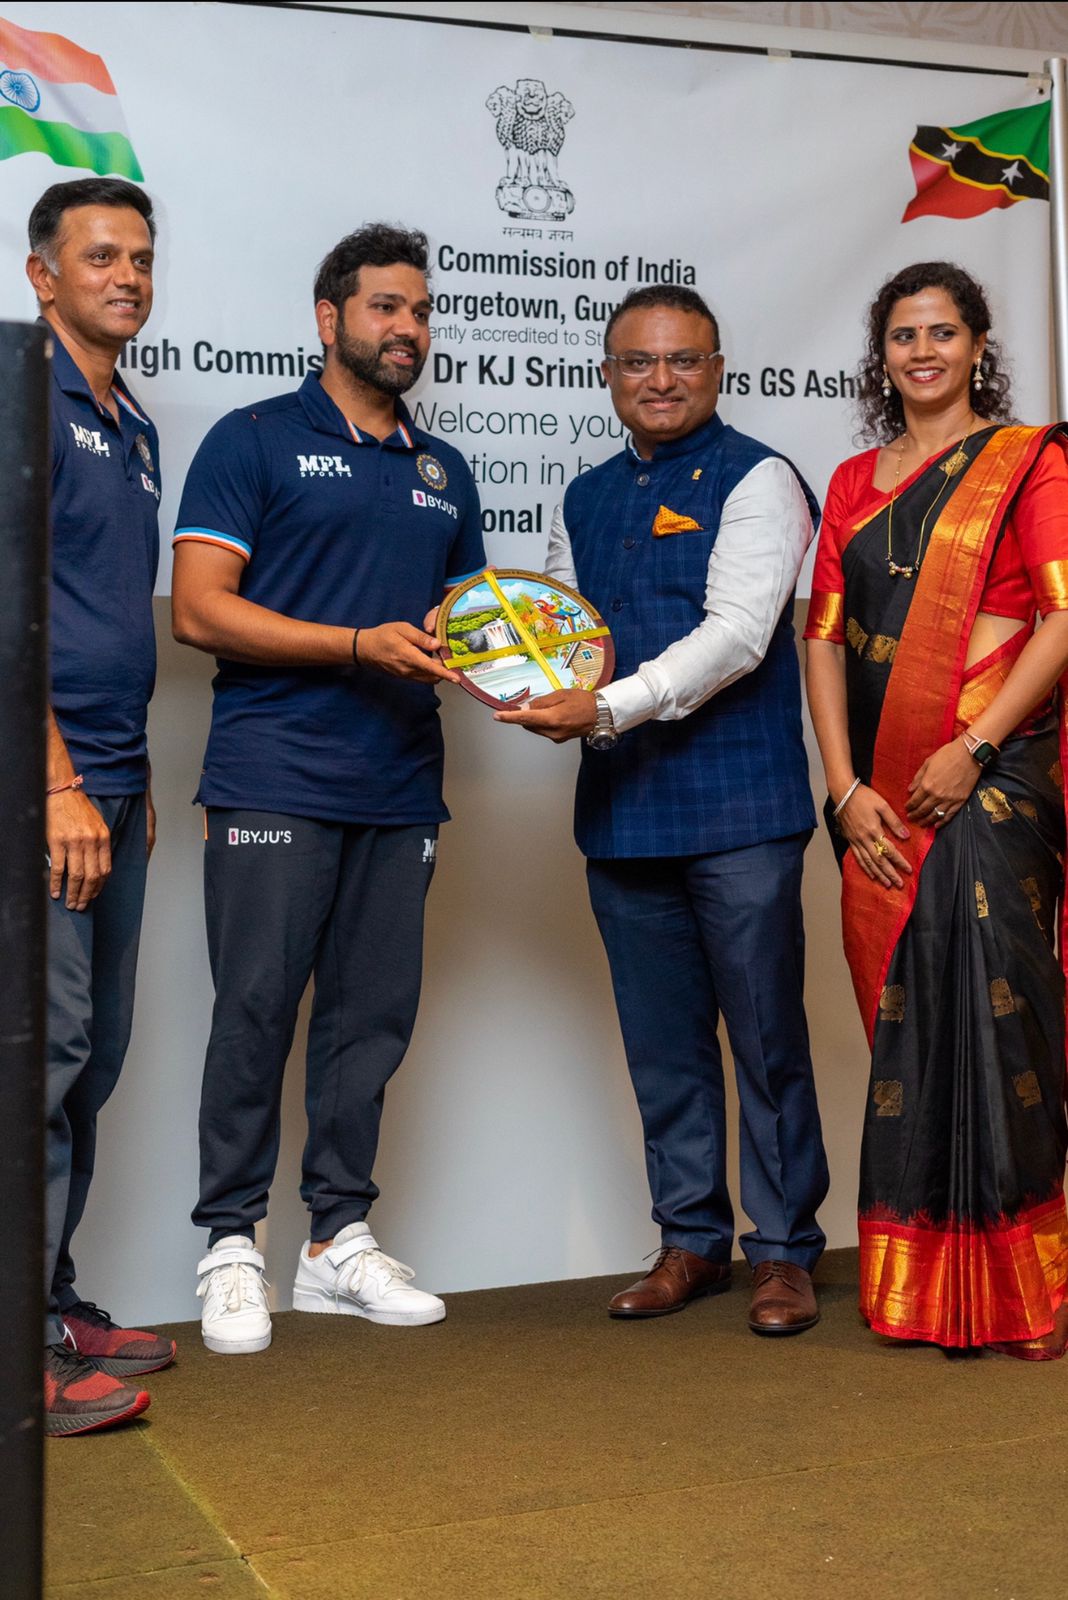 Rohit Sharma and Rahul Dravid being felicitated by High commissioner Dr. KJ Srinivasa | BCCI